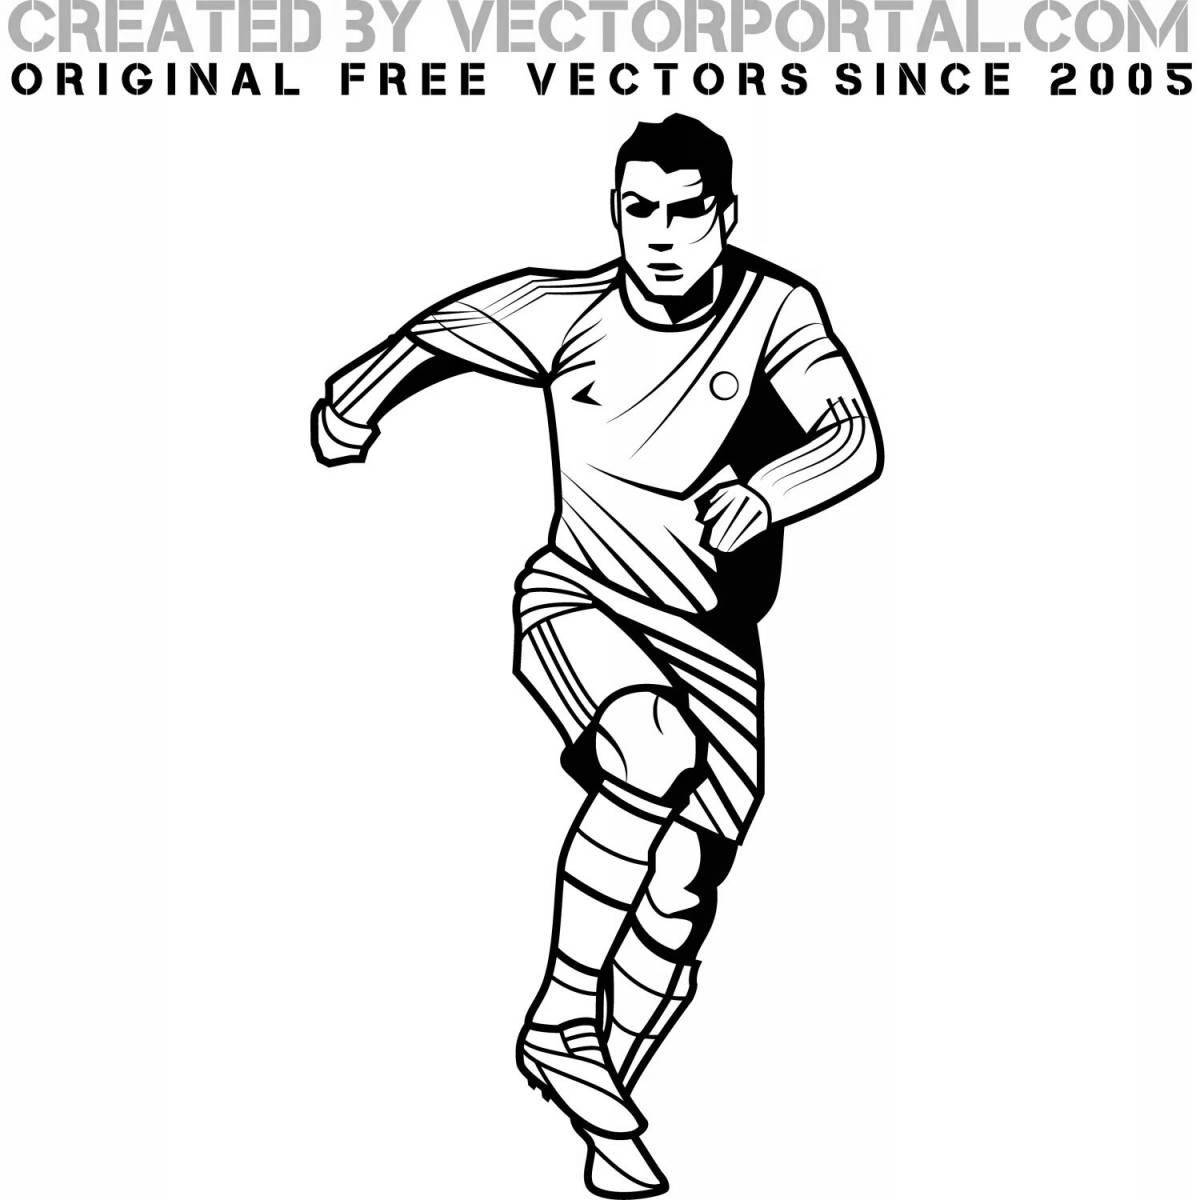 Coloring page glowing football player ronaldo